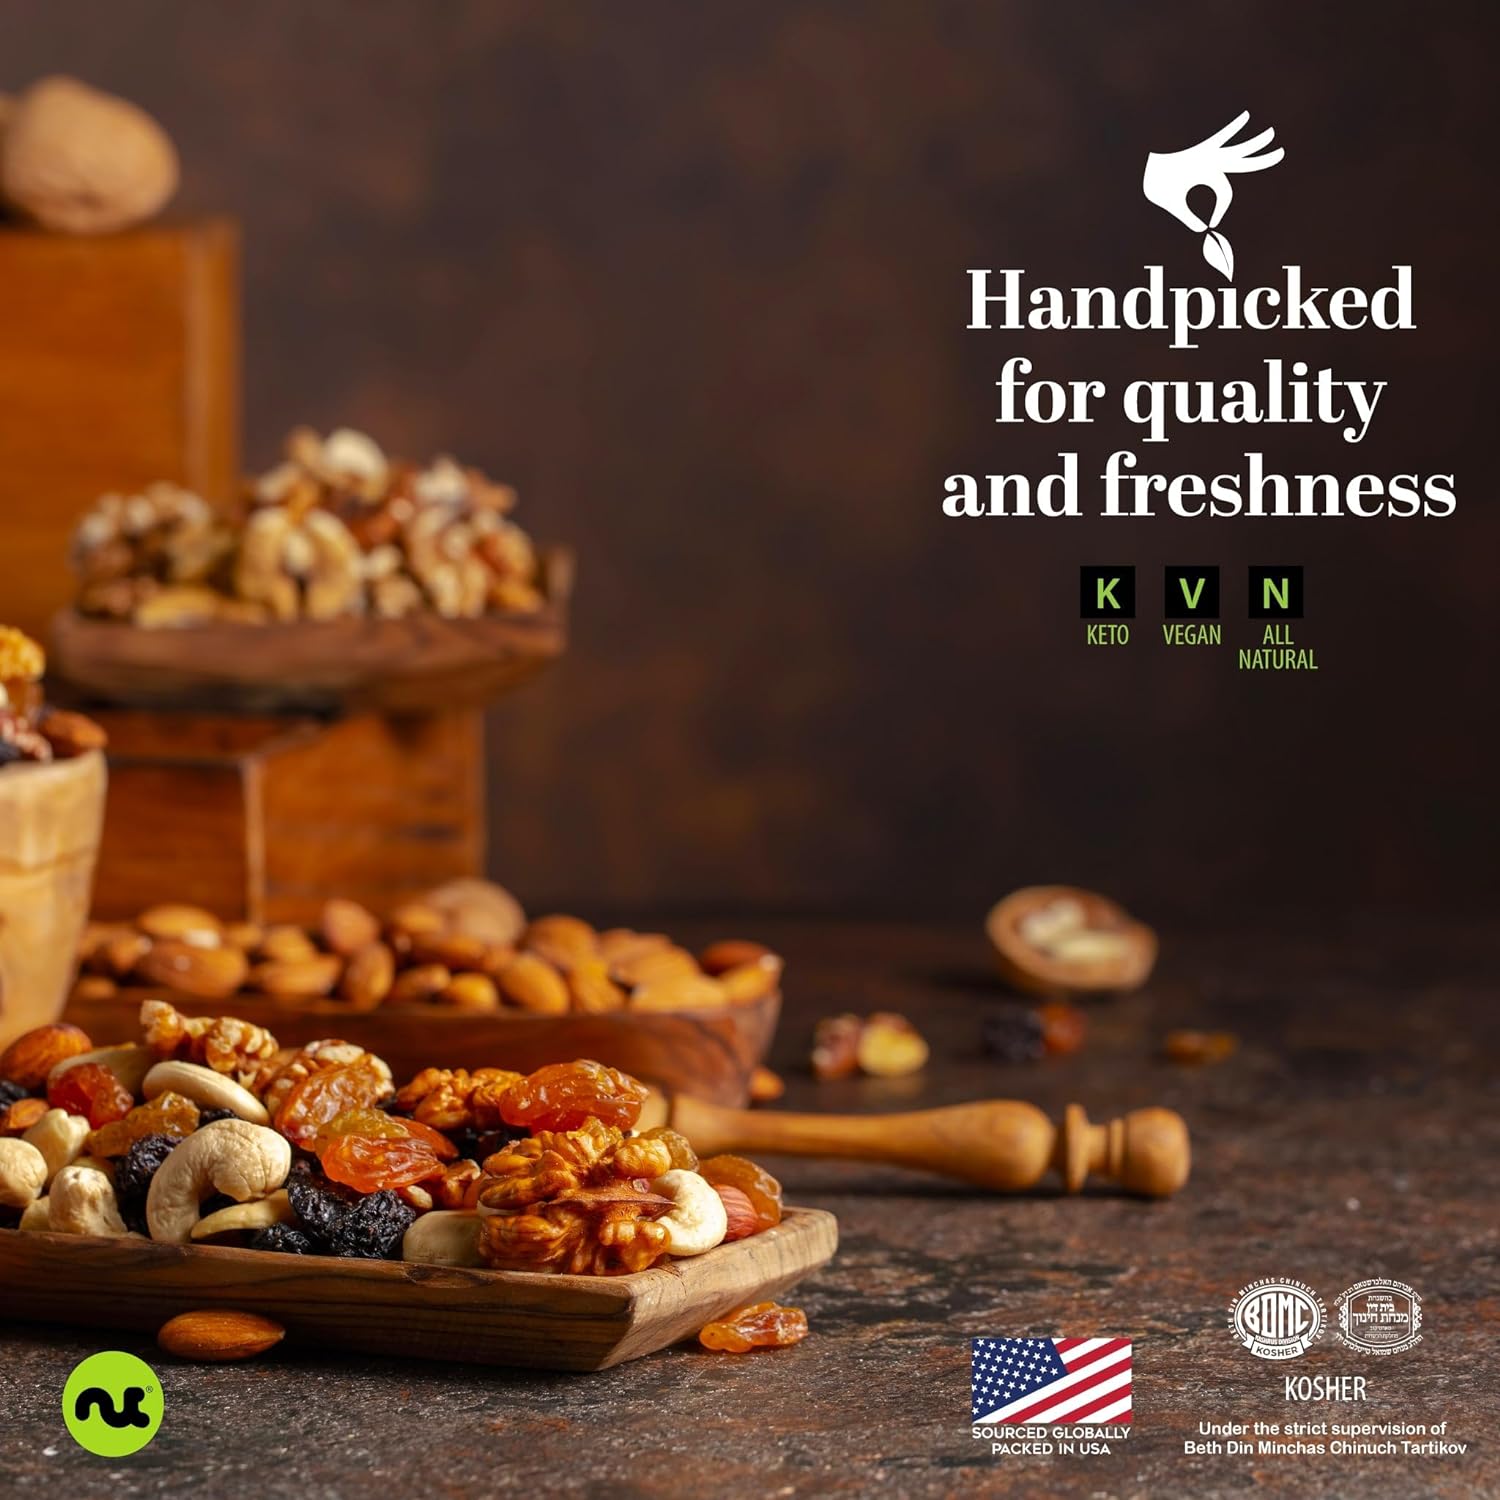 Nut Cravings - Freshly Roasted & Salted California Pistachios (48oz - 3 LB) Packed Fresh in Resealable Bag - Nut Snack - Healthy Protein Food, All Natural, Keto Friendly, Vegan, Kosher